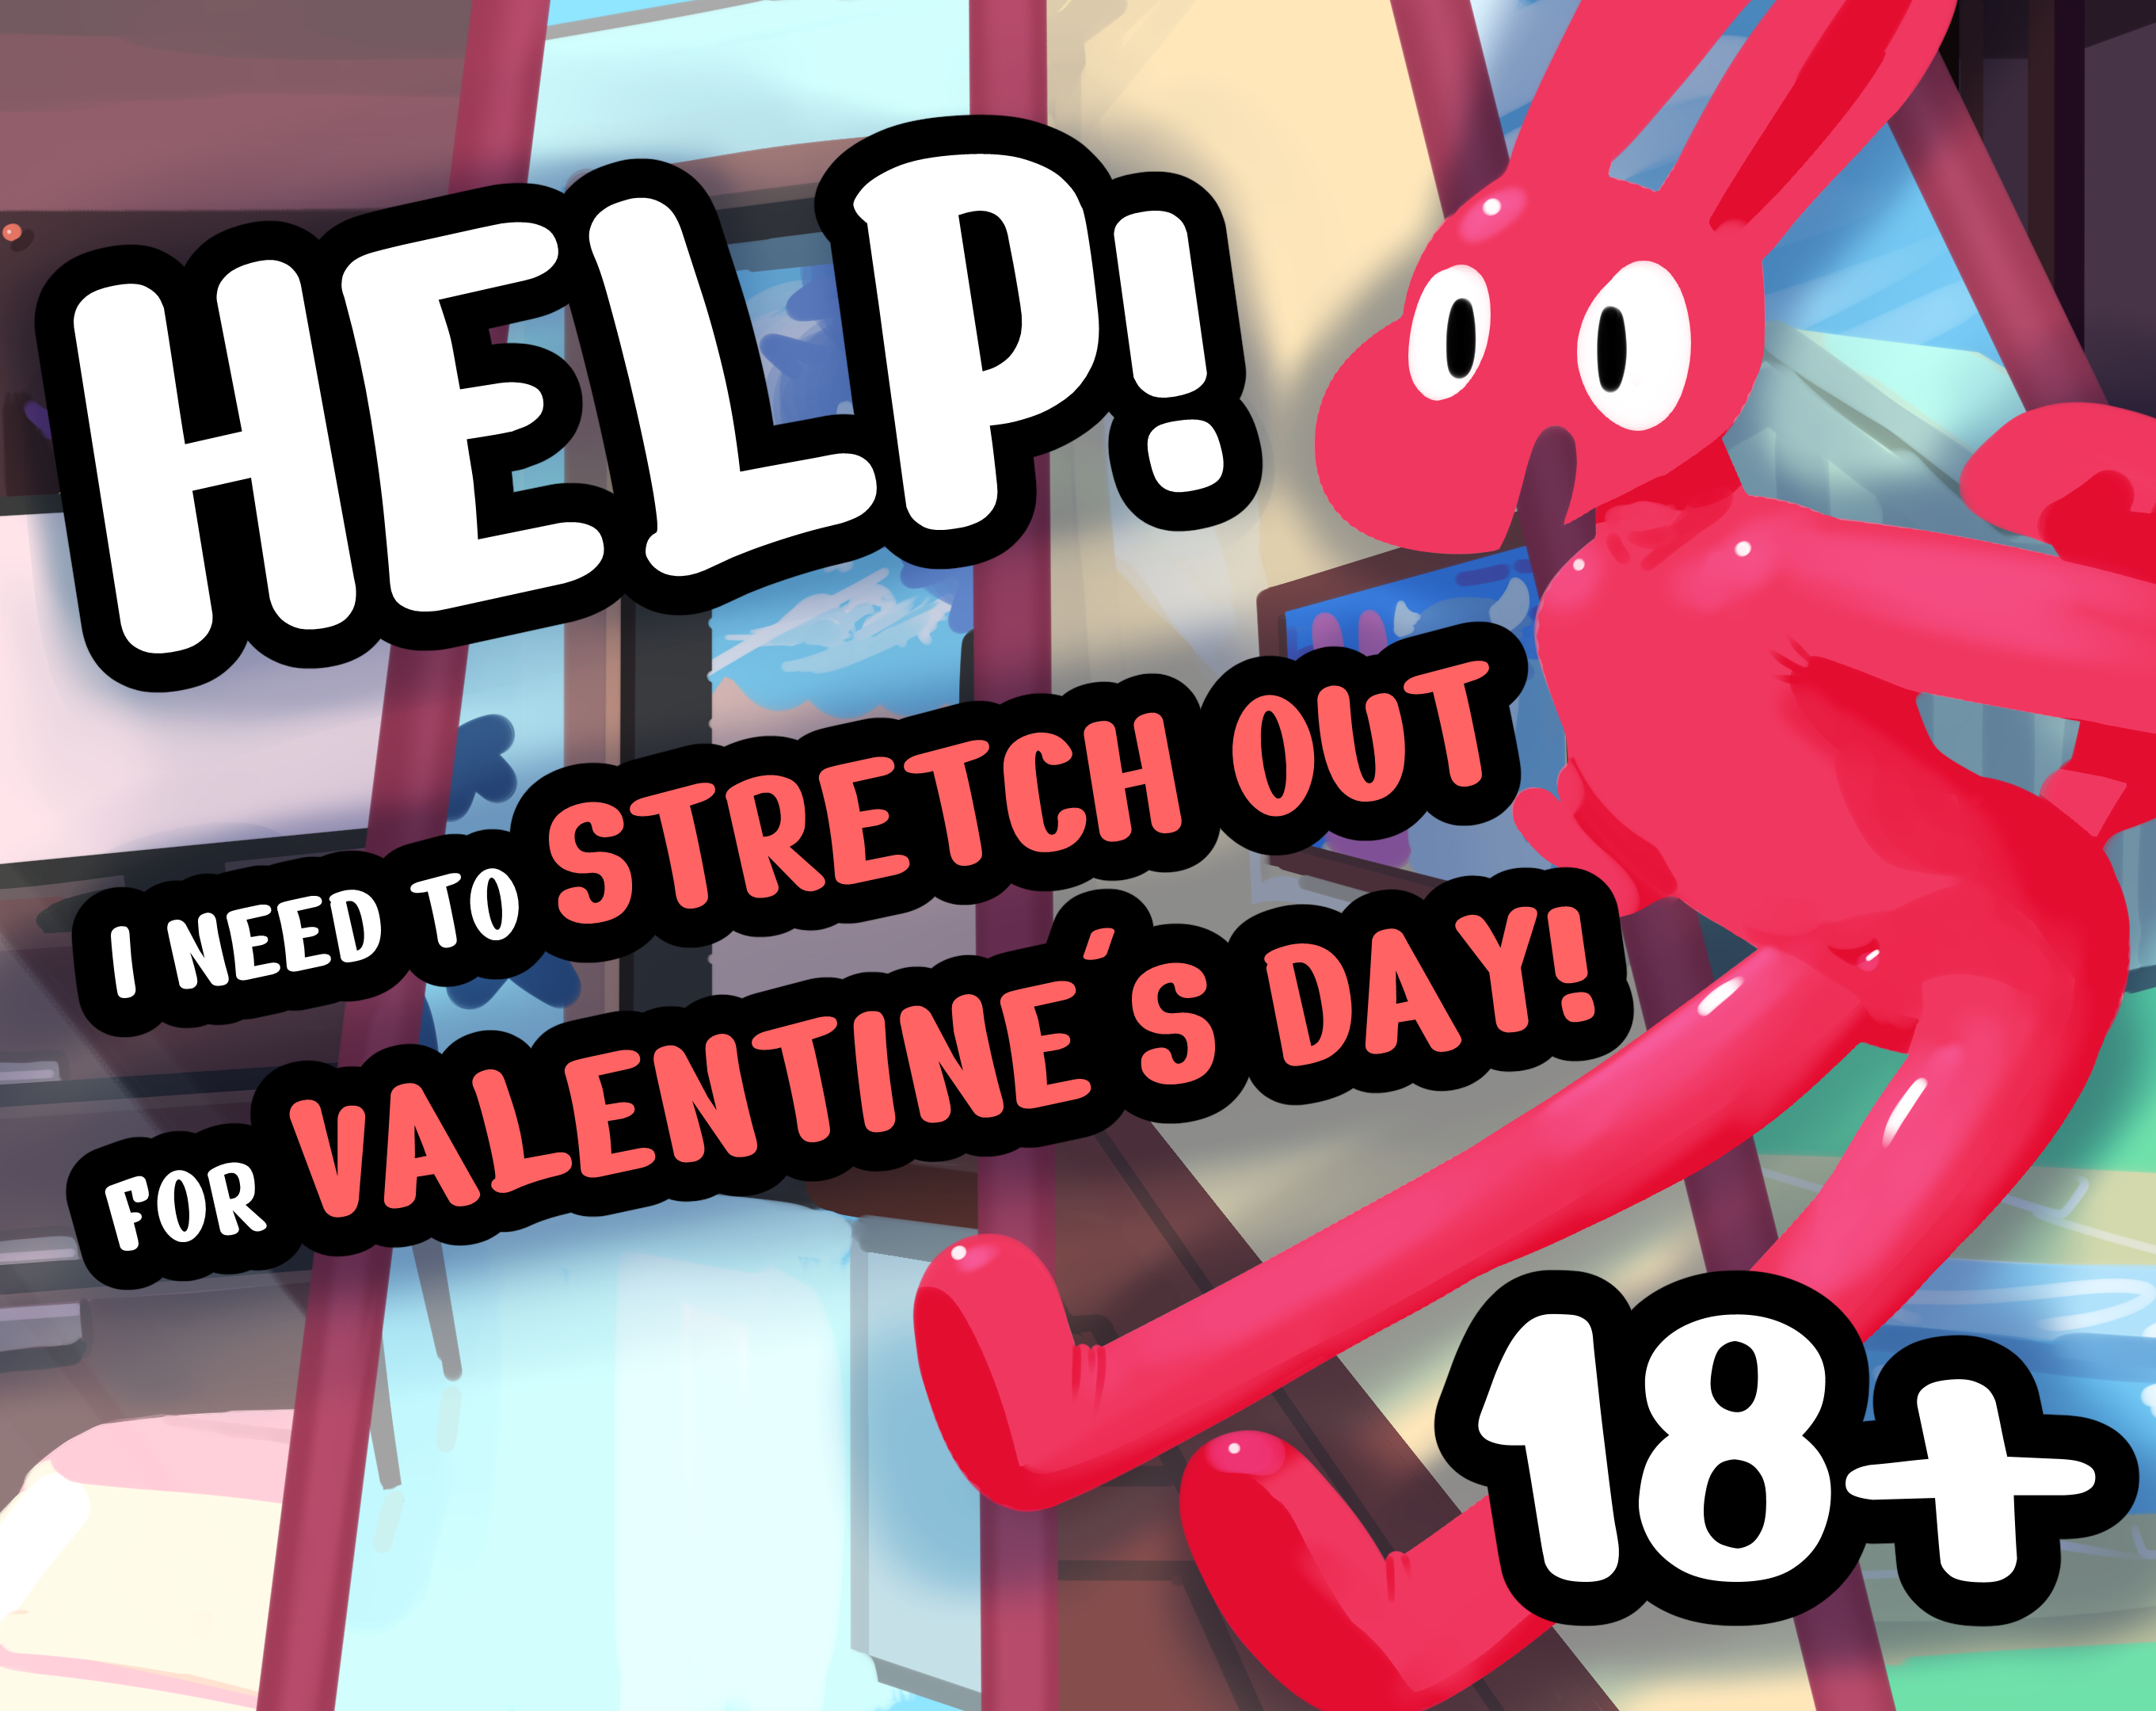 Help! I Need to Stretch Out For Valentines Day! by pastrygames for